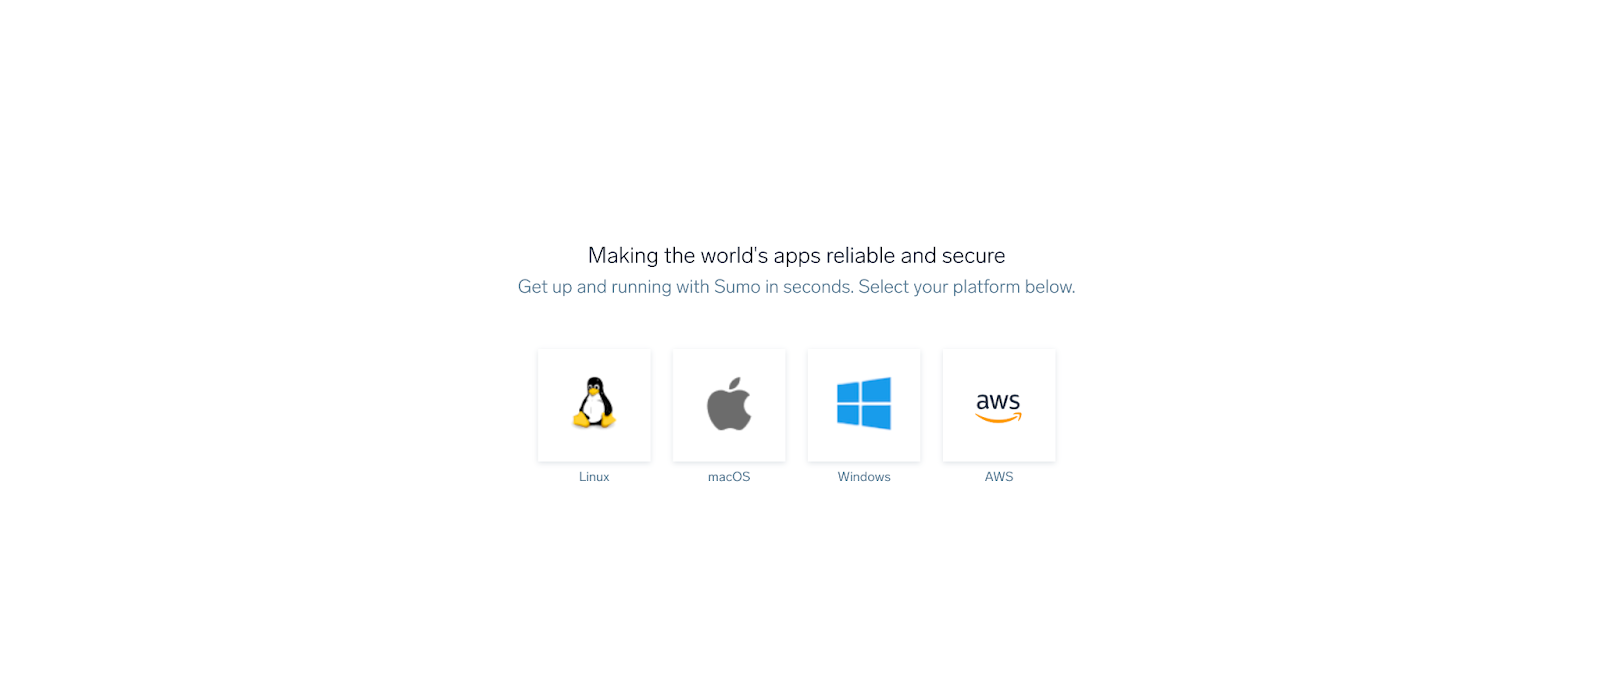 Making the world's apps reliable and secure